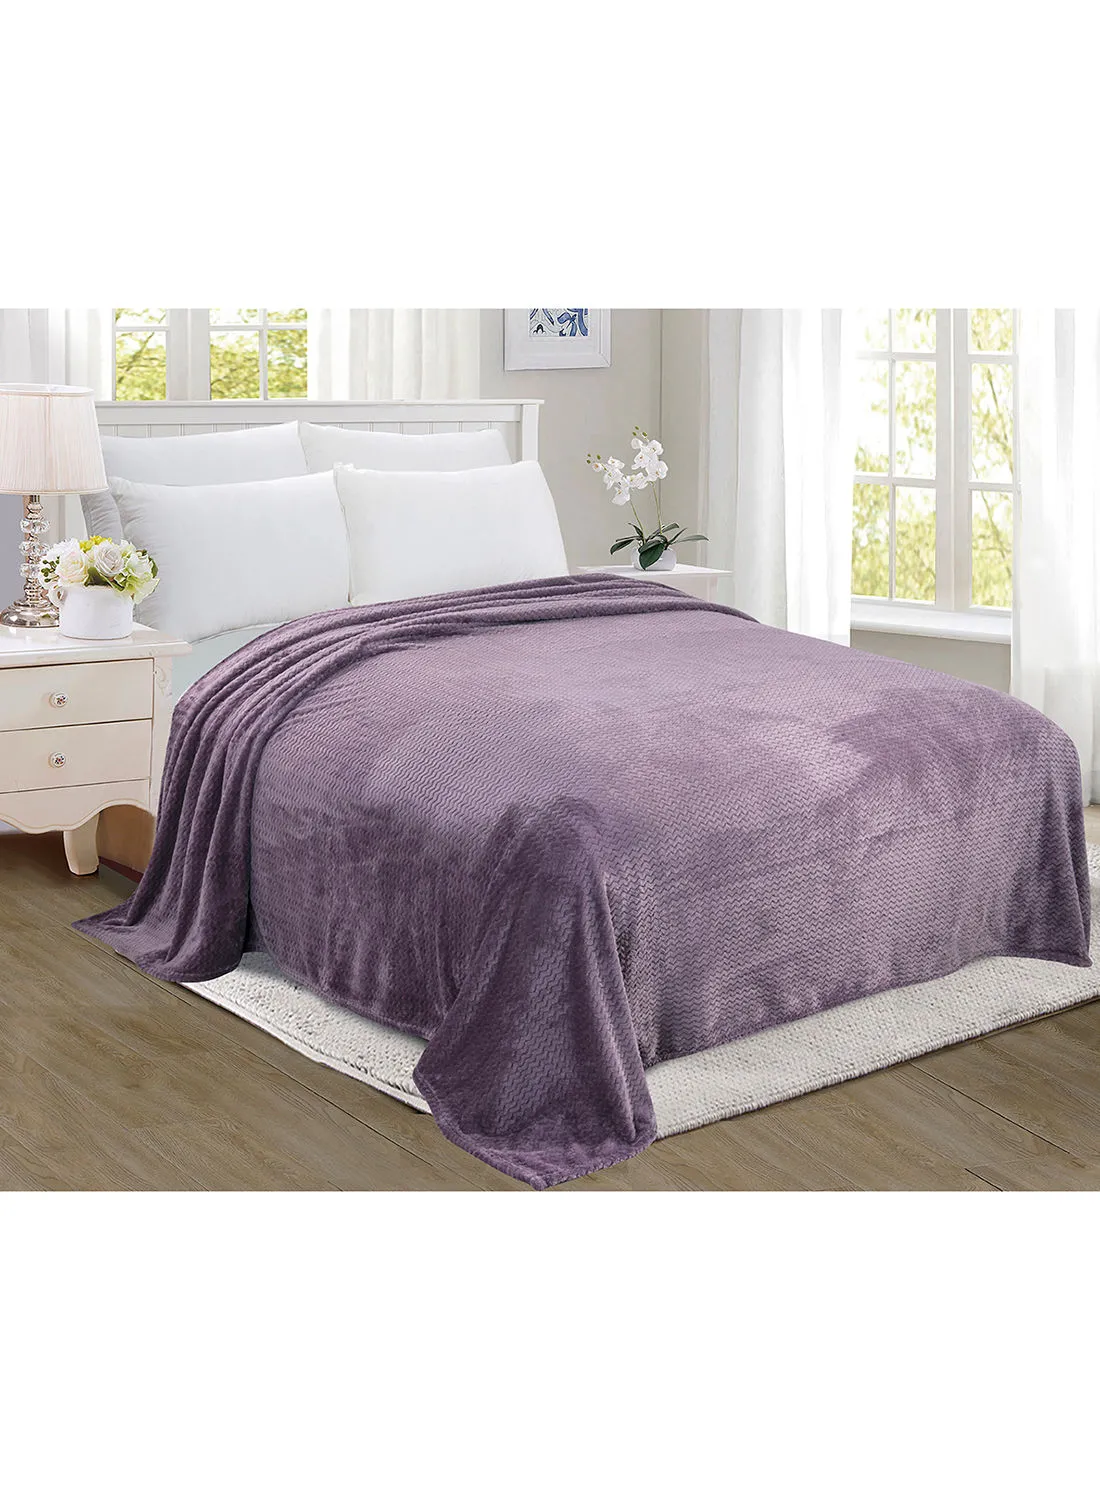 Noon East Lightweight Summer Blanket Queen Size 280 GSM Wave Pattern Jaquard Fleece Extra Soft All Season Blanket Bed And Sofa Throw  160 X 220 Cms Purple Purple 160 x 220cm